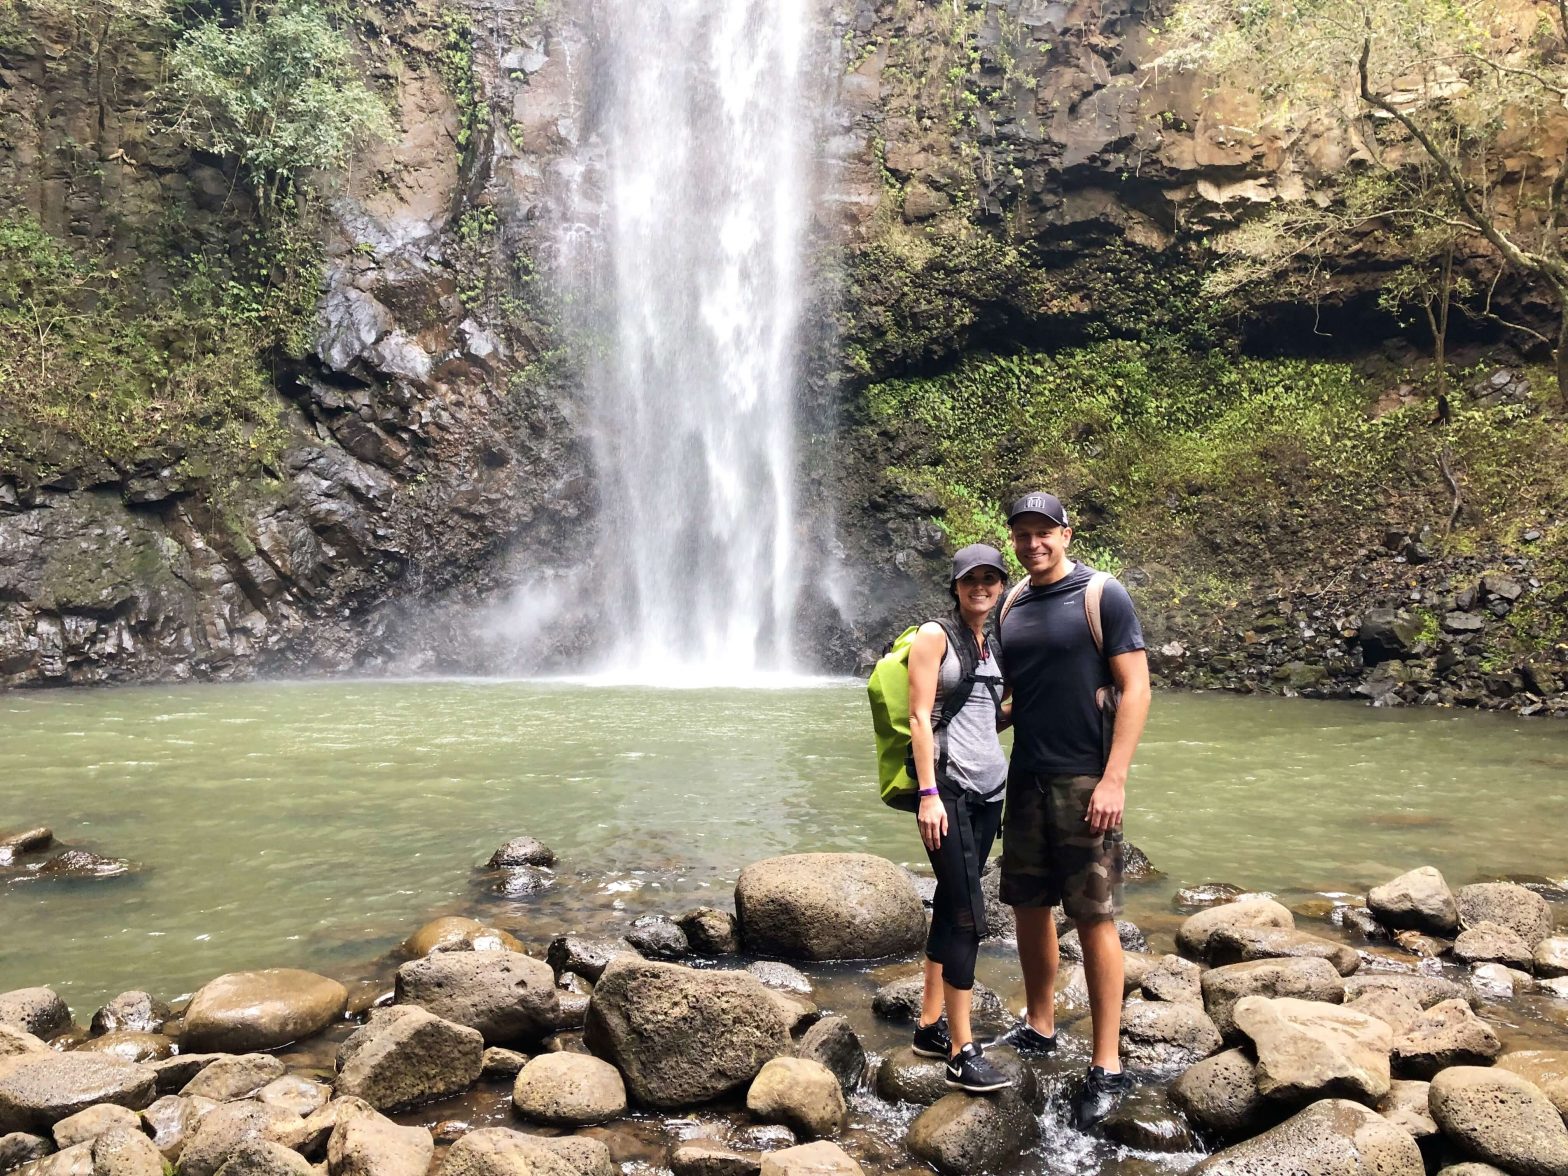 Couple standing in front of waterfall in Kauai. Used Chase Ultimate Rewards for this free trip.